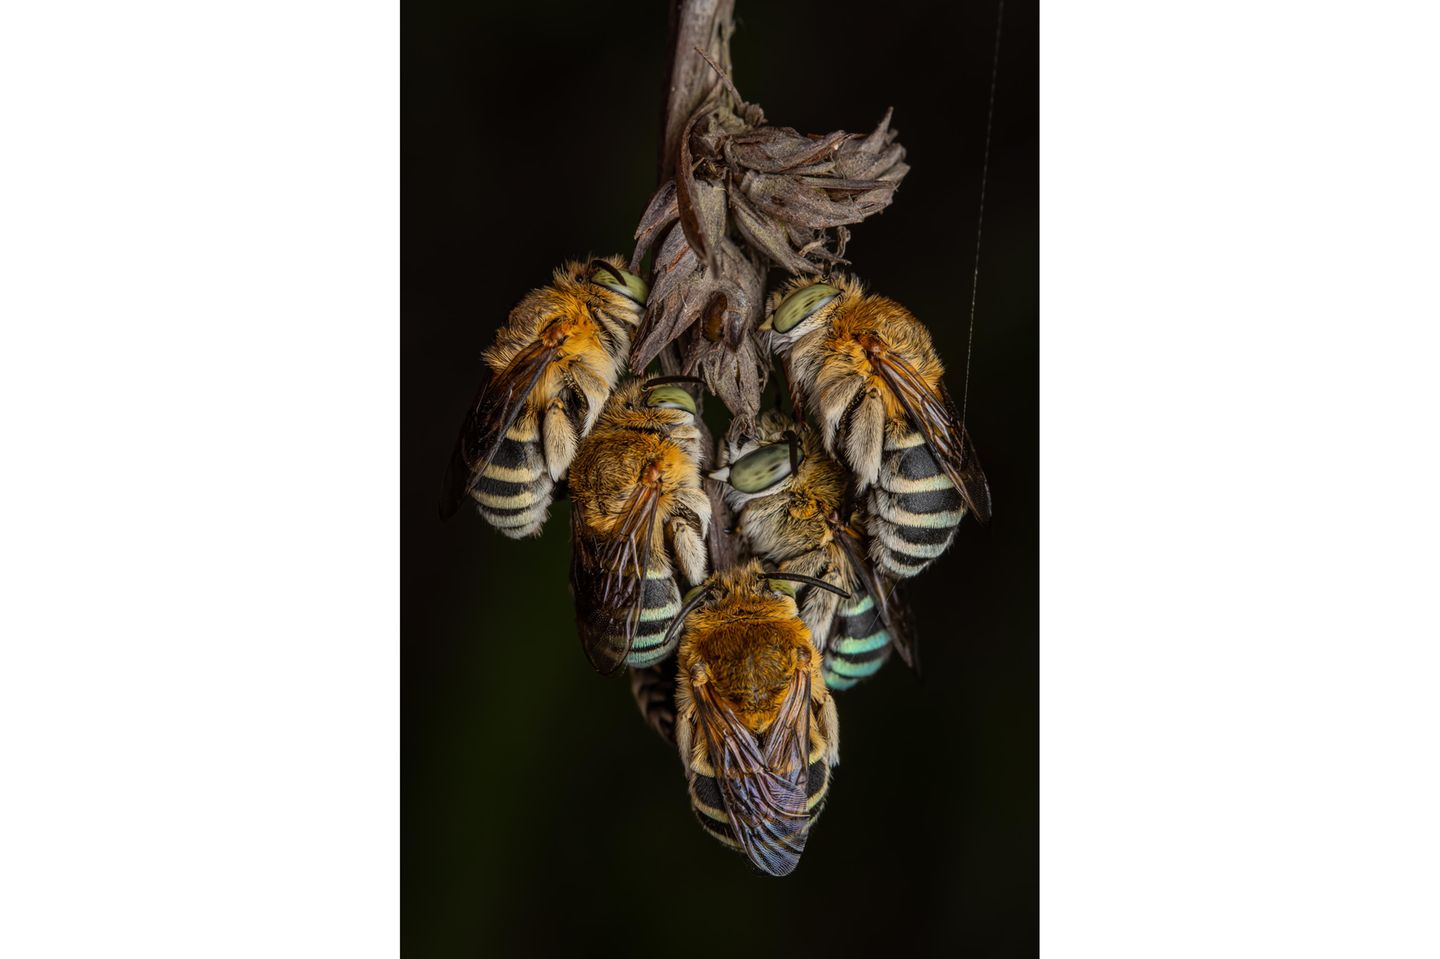 Insects-Finalist-Artur Tomaszek-Roosting-Together-CUPOTY  Name: Artur Tomaszek Picture title: Roosting Together Category: Insects (Finalist) Nationality: Polish Occupation:      Artur: ‘Blue-banded bees (Zonamegilla sp.) are unique insects, well known for their roosting behaviour. After dusk, they rest individually or in a cluster on the end of dried weeds by grasping the stem with their mandibles. This particular sleeping aggregation was quite special since all blue-banded bees I’ve seen so far kept a small distance between each other – these guys rested tucked together tightly. The photo was taken in May 2021 in Hong Kong.’      Technical information: Canon EOS 90D Laowa100mm F2.8 CA-Dreamer Macro 2x 1/200, f/11, ISO200 Accessories: Flash diffuser  Post processing: Basic adjustments in Lightroom      Instagram: talibzuo  Facebook: Inglourious Reptiles  Flickr: Inglourious Reptiles